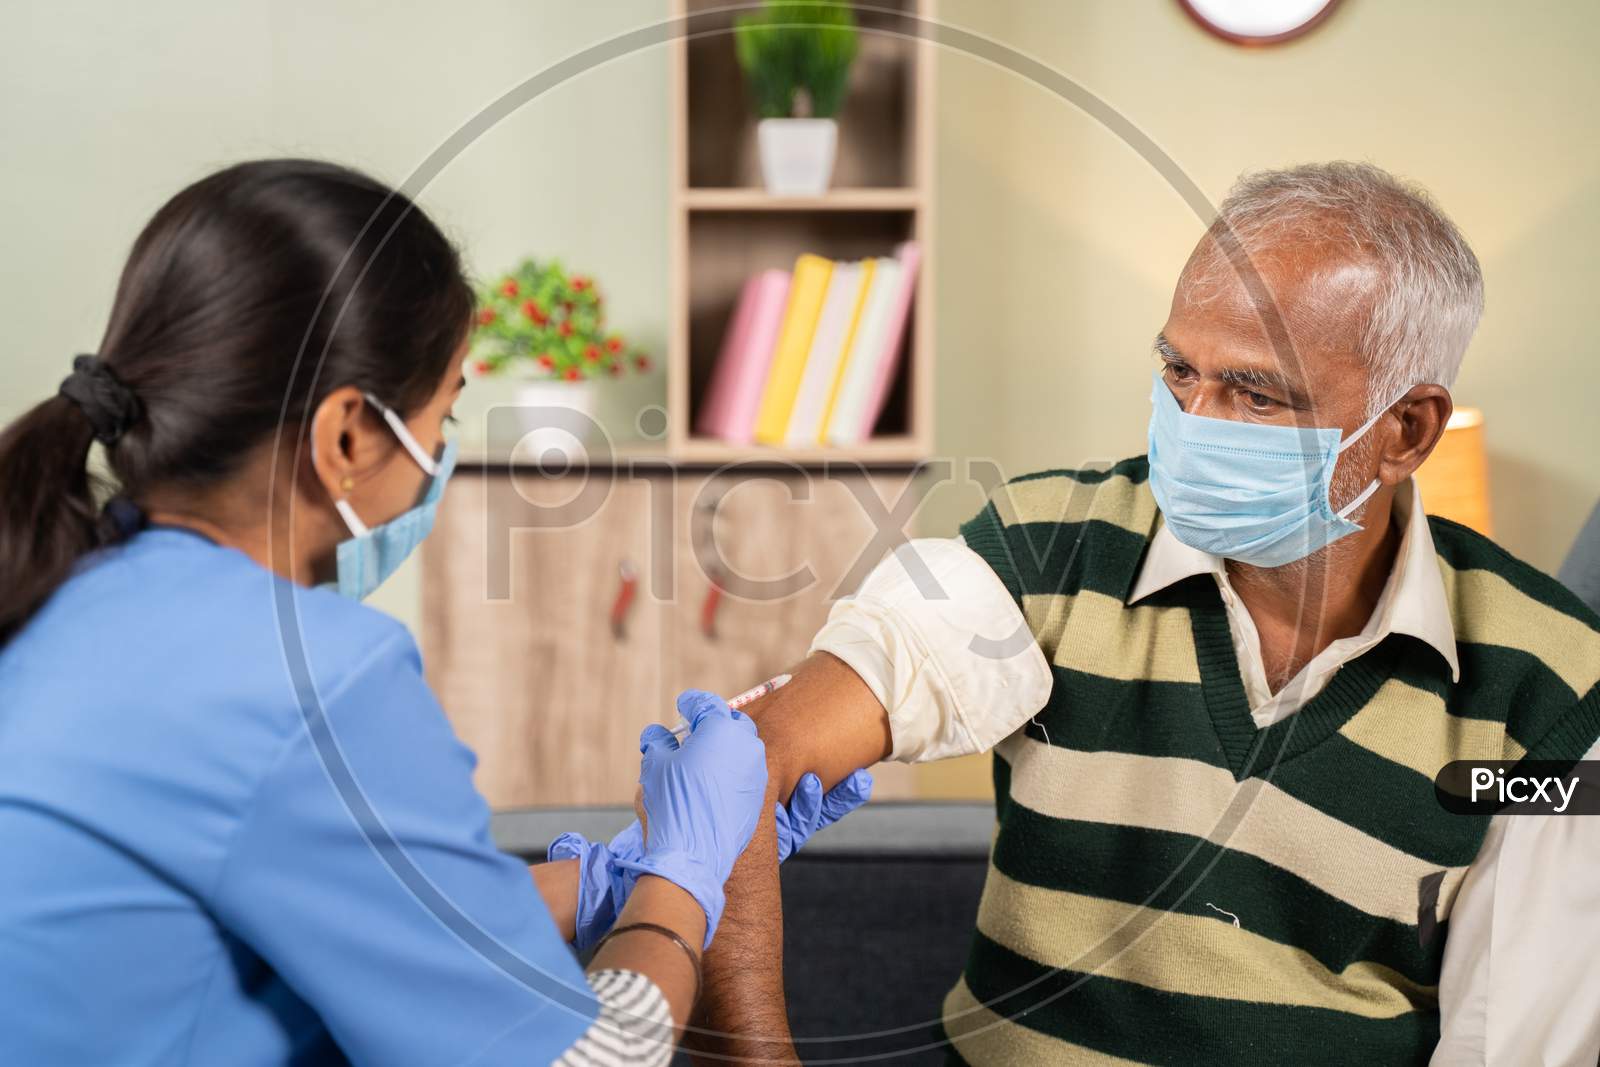 Doctor Giving Vaccination Shot To Elderly Patient By Syringe Or Injunction At Home While Both Worj Face Mask - Concept Of Home Health Check To Seniors During Coronavirus Covid-19 Pandemic.